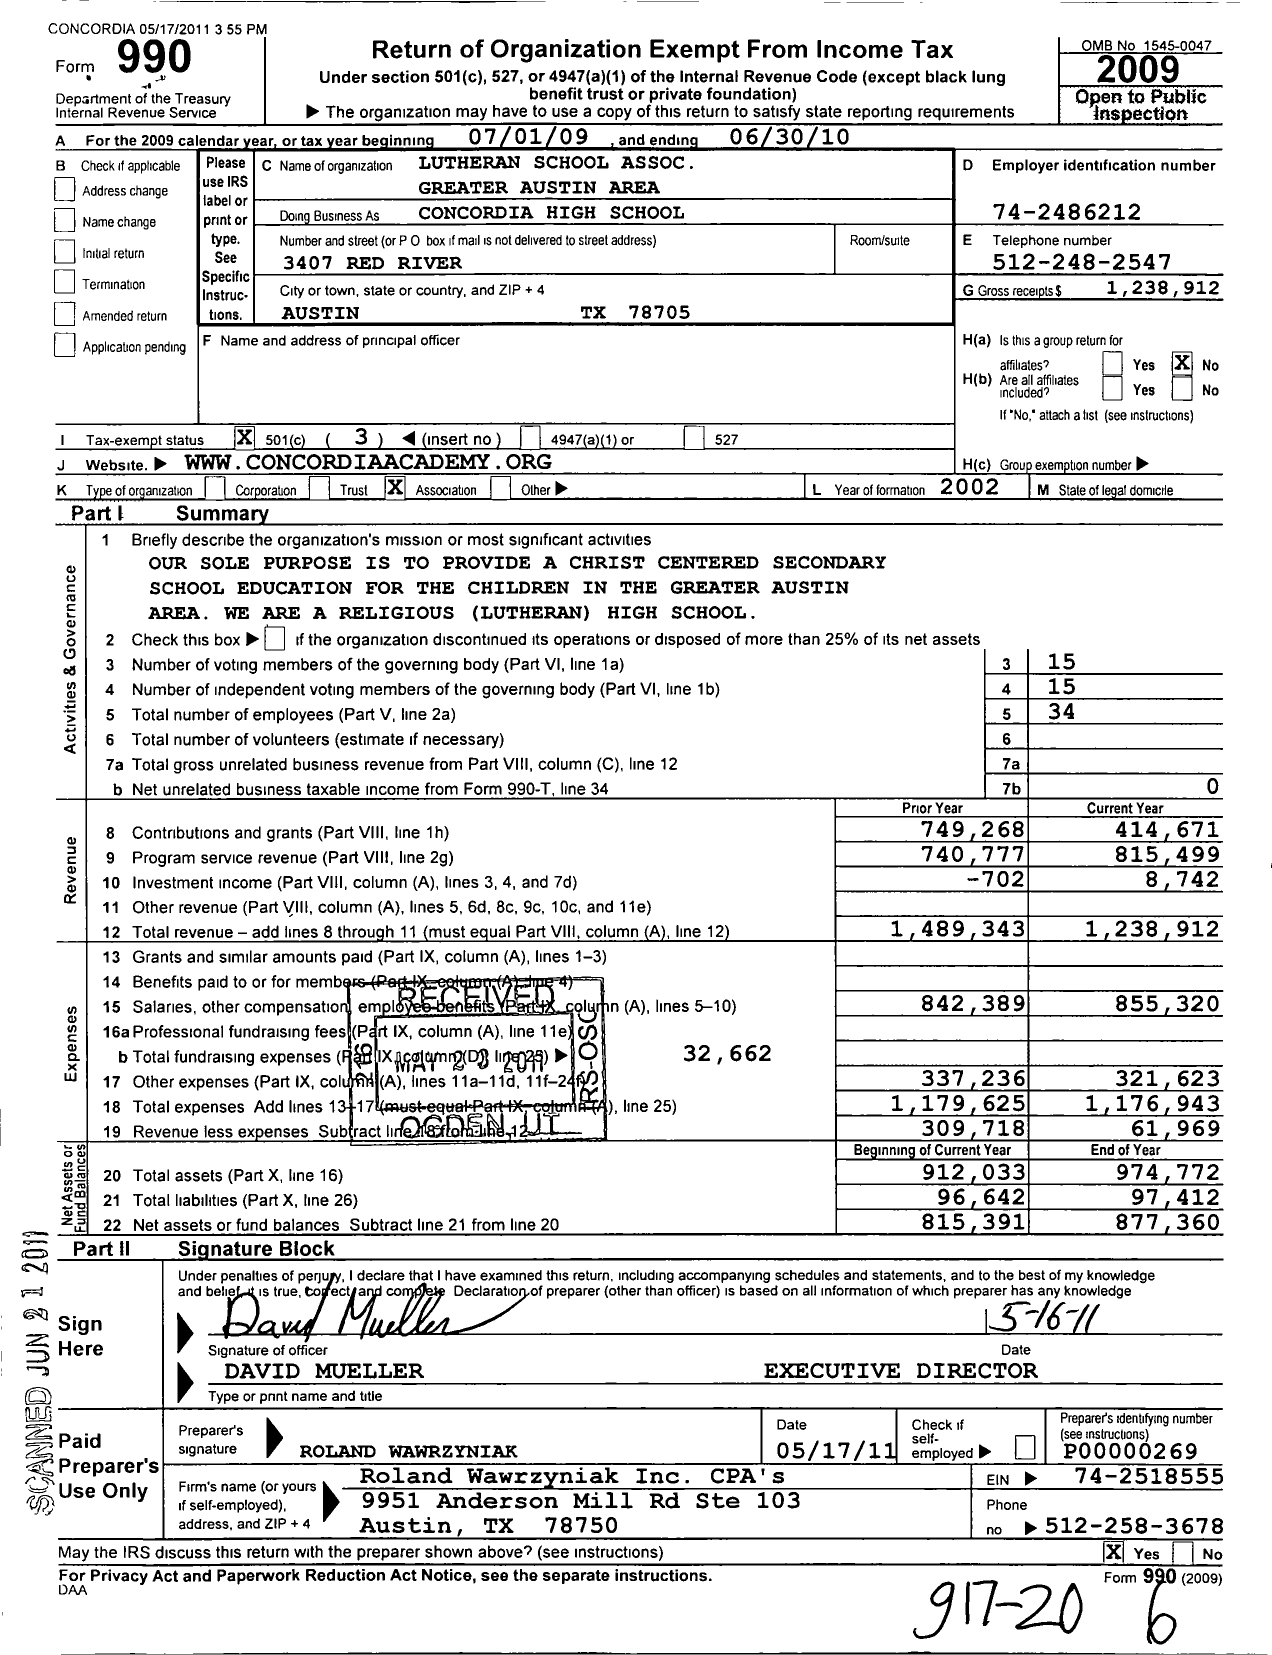 Image of first page of 2009 Form 990 for Lutheran School Association Greater Austin Area